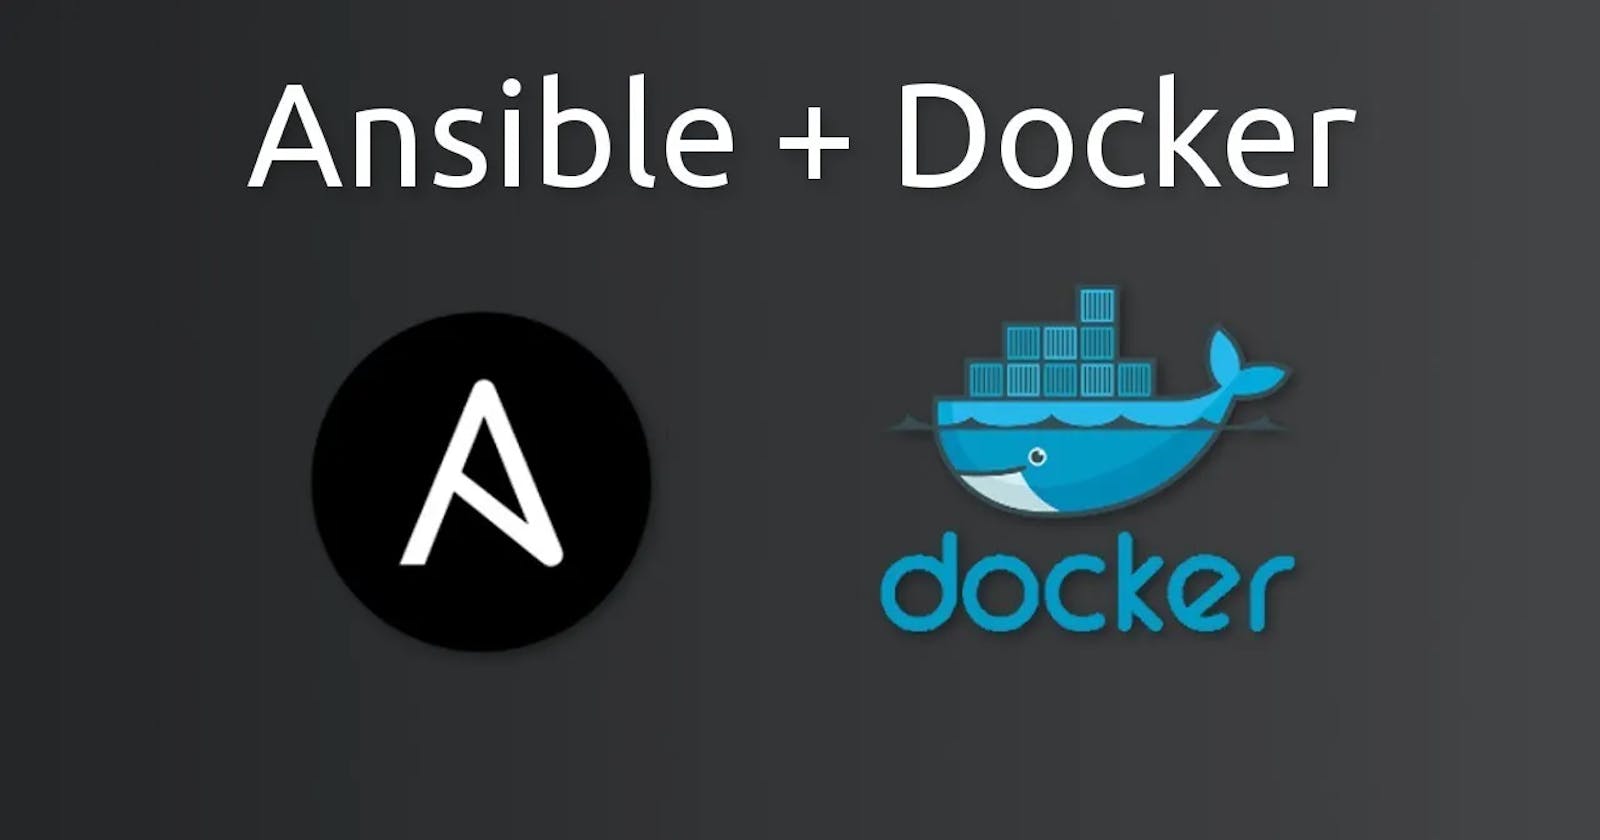 Start a Docker Container with the help of Ansible